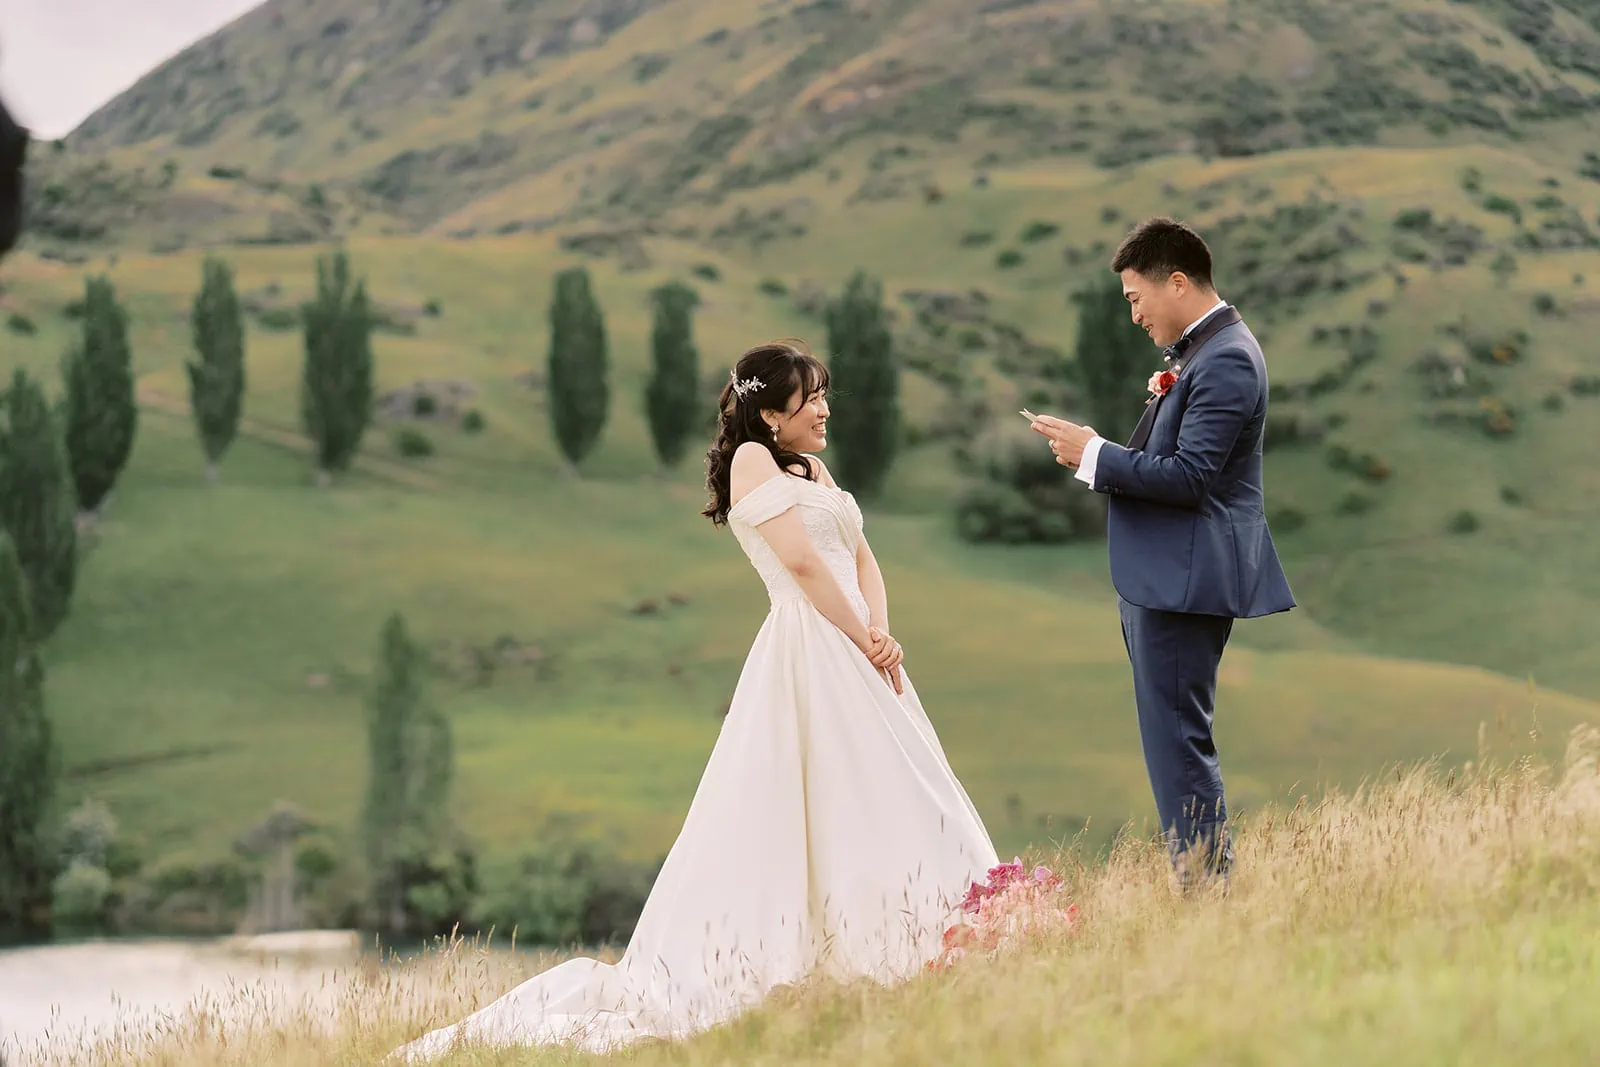 Queenstown Elopement Heli Wedding Photographer クイーンズタウン結婚式 | A pre-wedding photoshoot featuring a bride and groom standing in a field, with majestic mountains as the breathtaking backdrop.